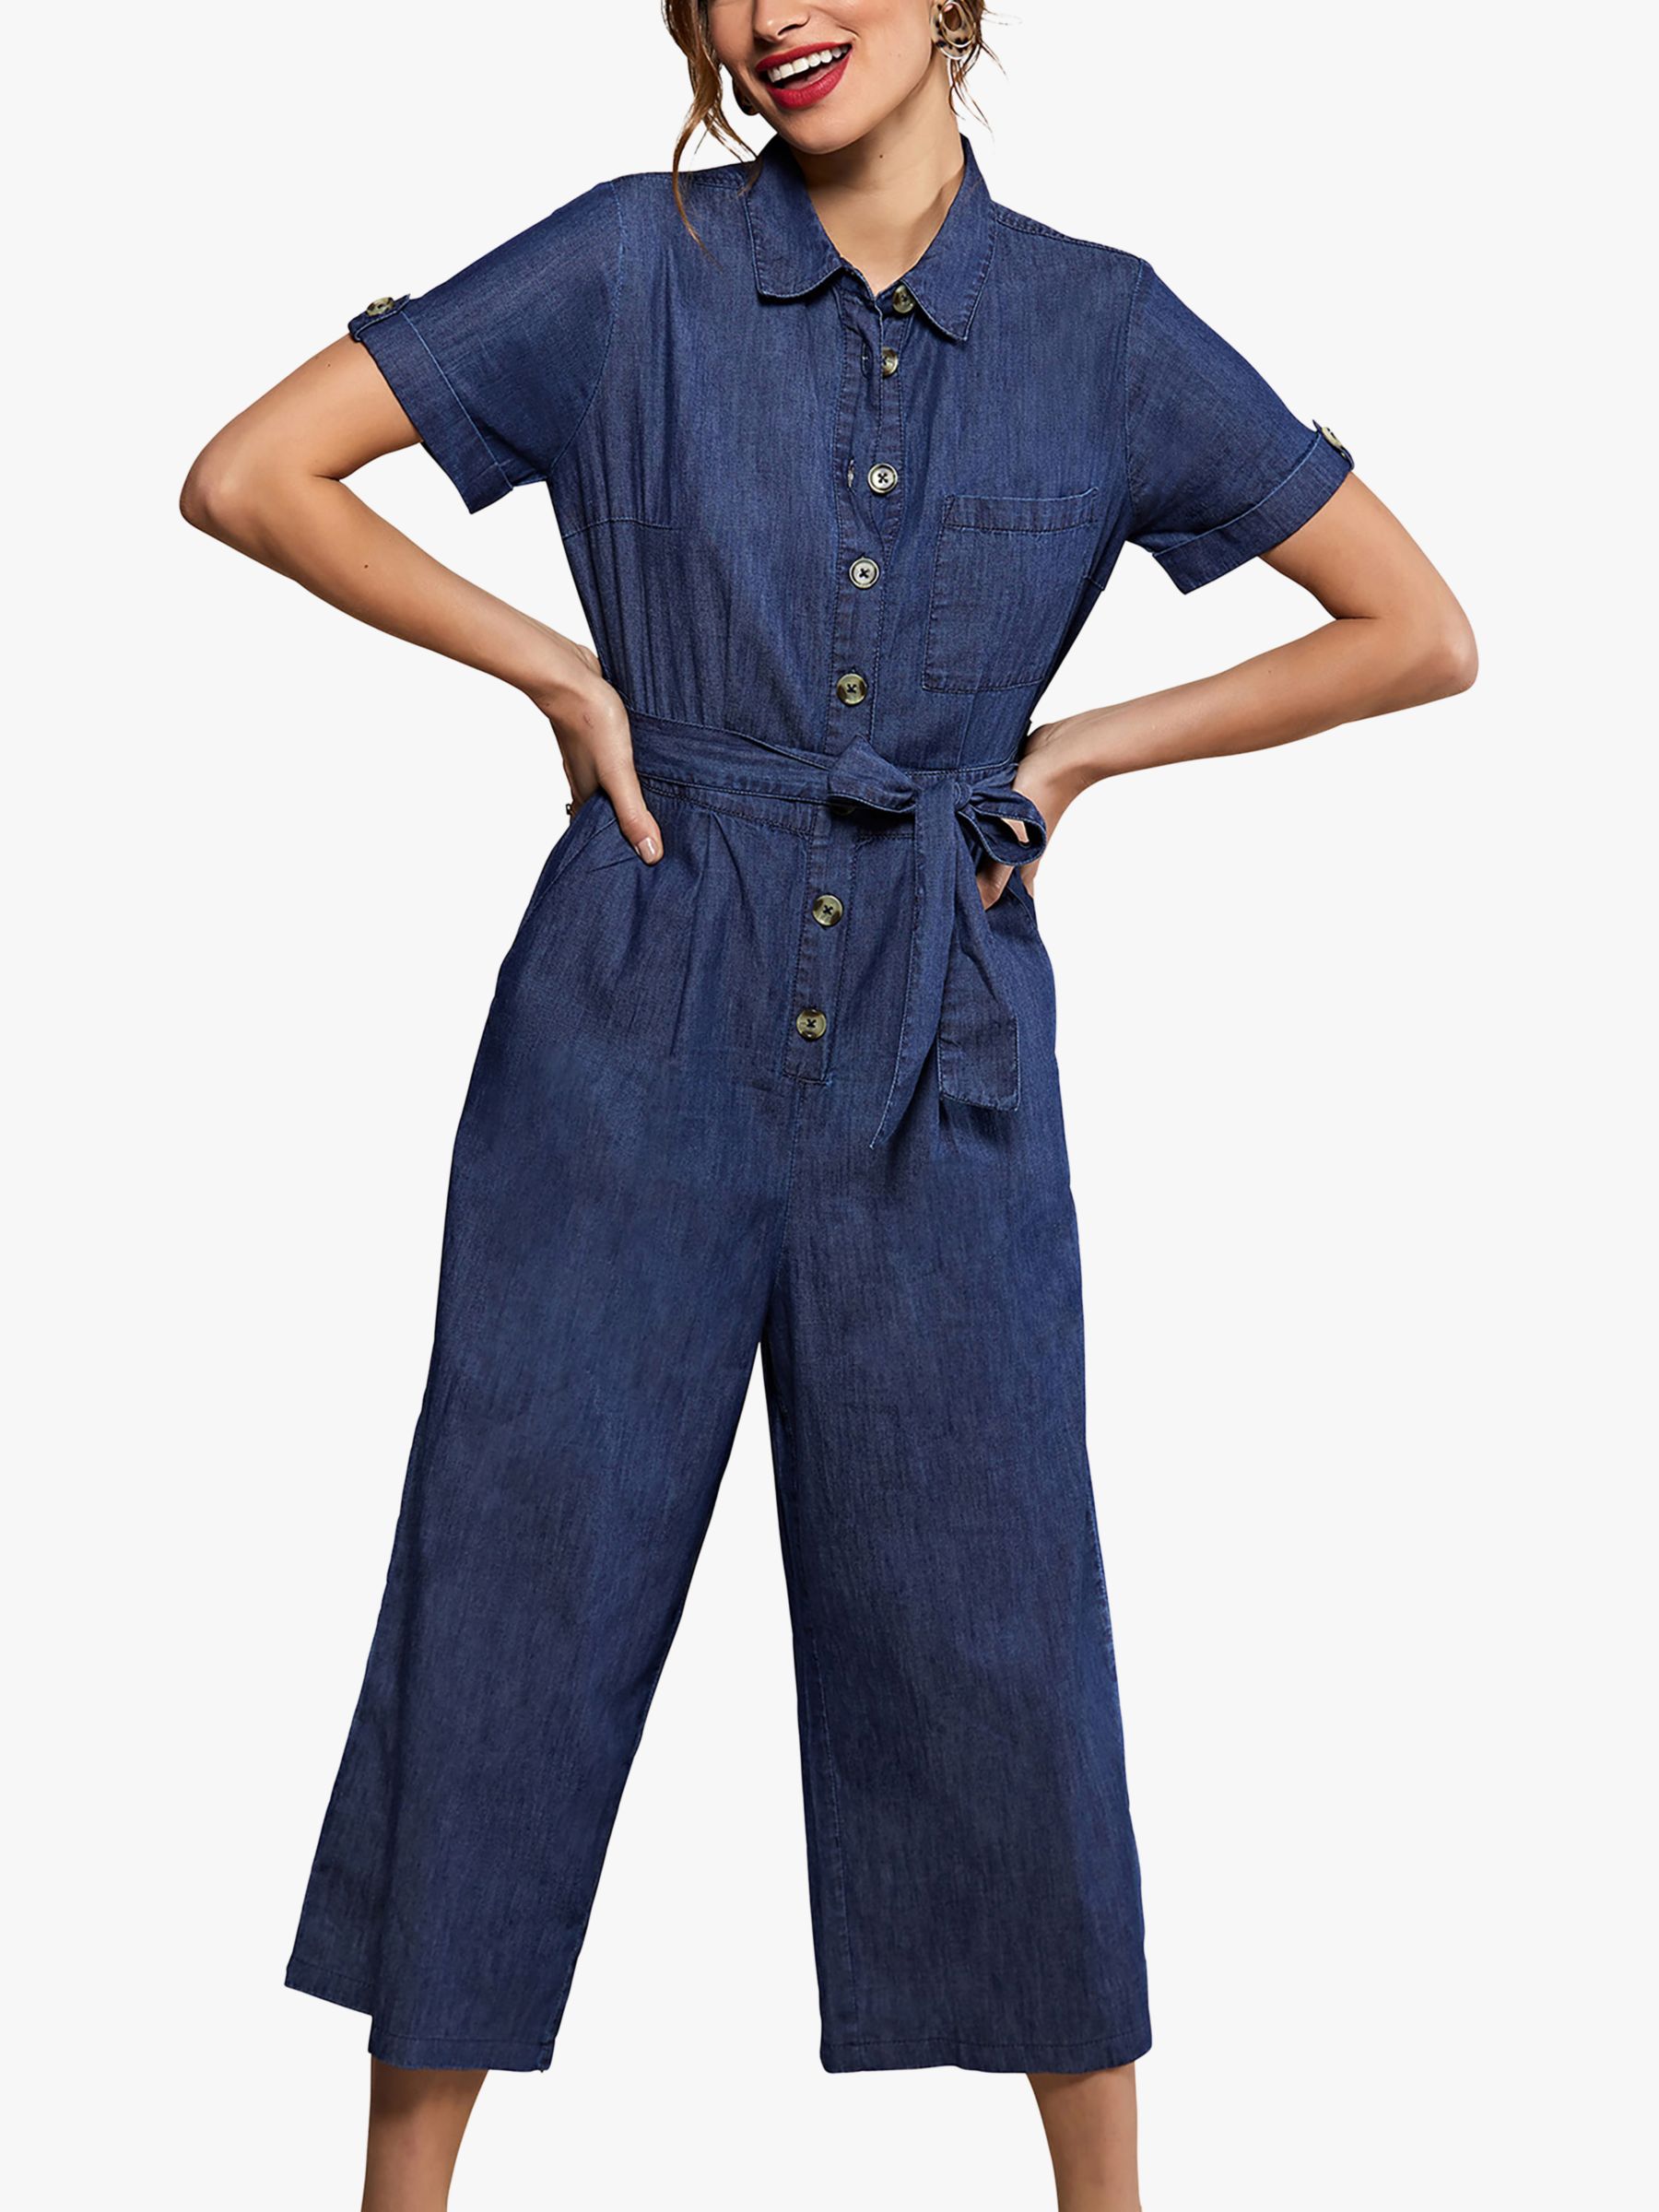 Whistles Emmie Cropped Linen Jumpsuit, Black at John Lewis & Partners